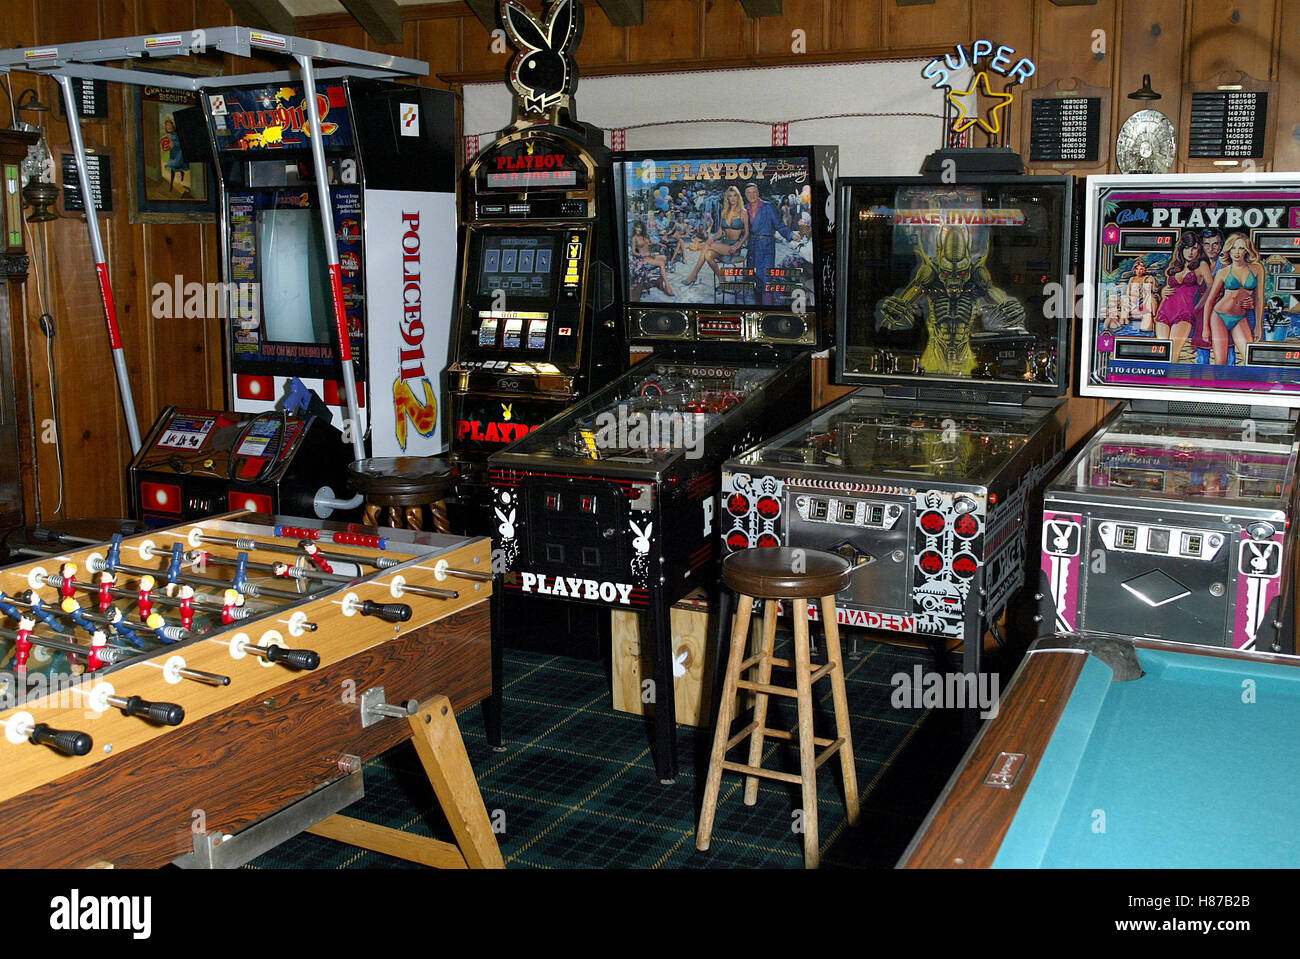 GAMES ROOM PLAYBOY MANSION CATCHES FASHIO PLAYBOY MANSION LOS ANGELES USA 15 May 2003 Stock Photo